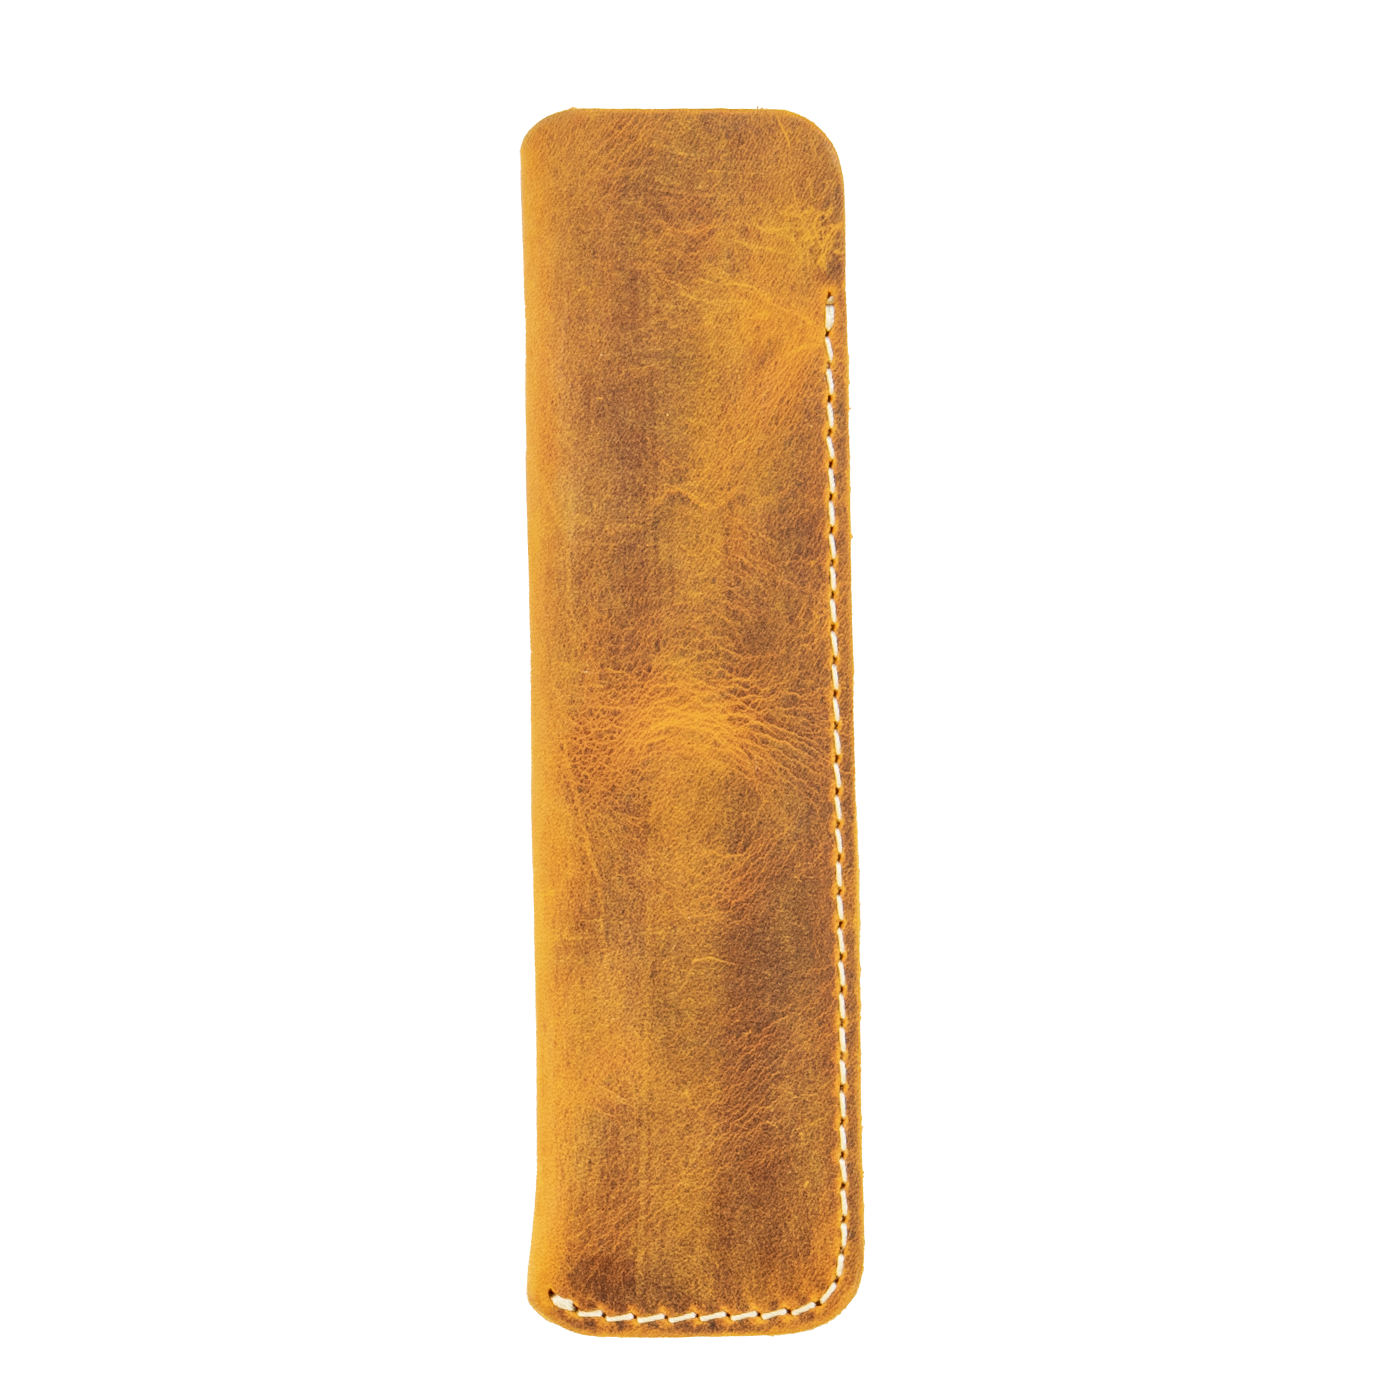 Galen Leather Co. Leather Single Pen Sleeve- Crazy Horse Brown